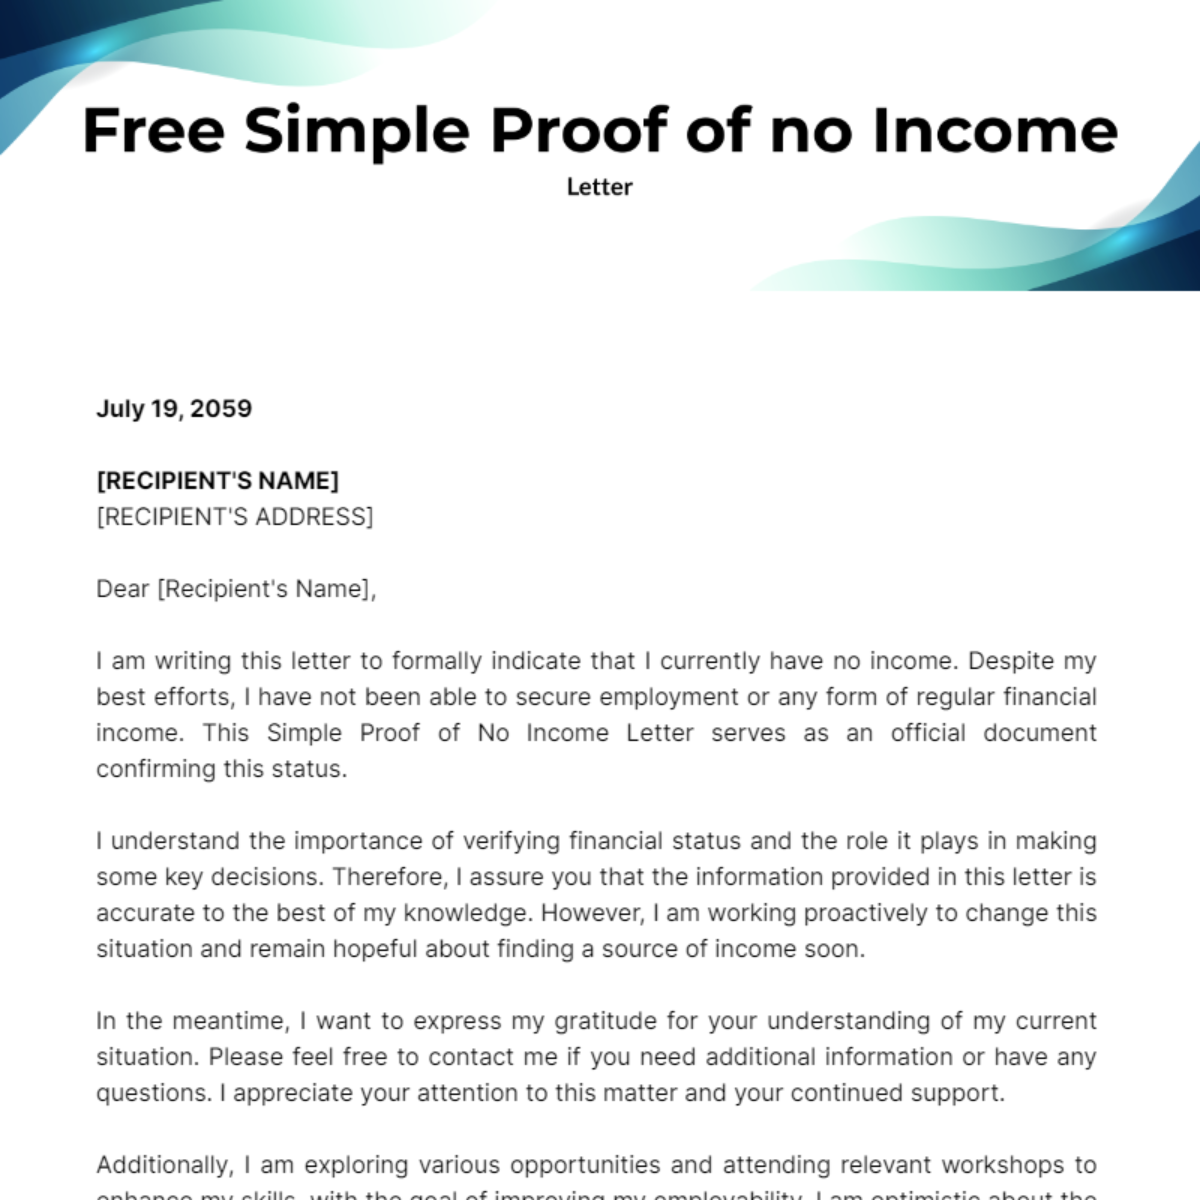 Free Simple Proof of no Income Letter Template